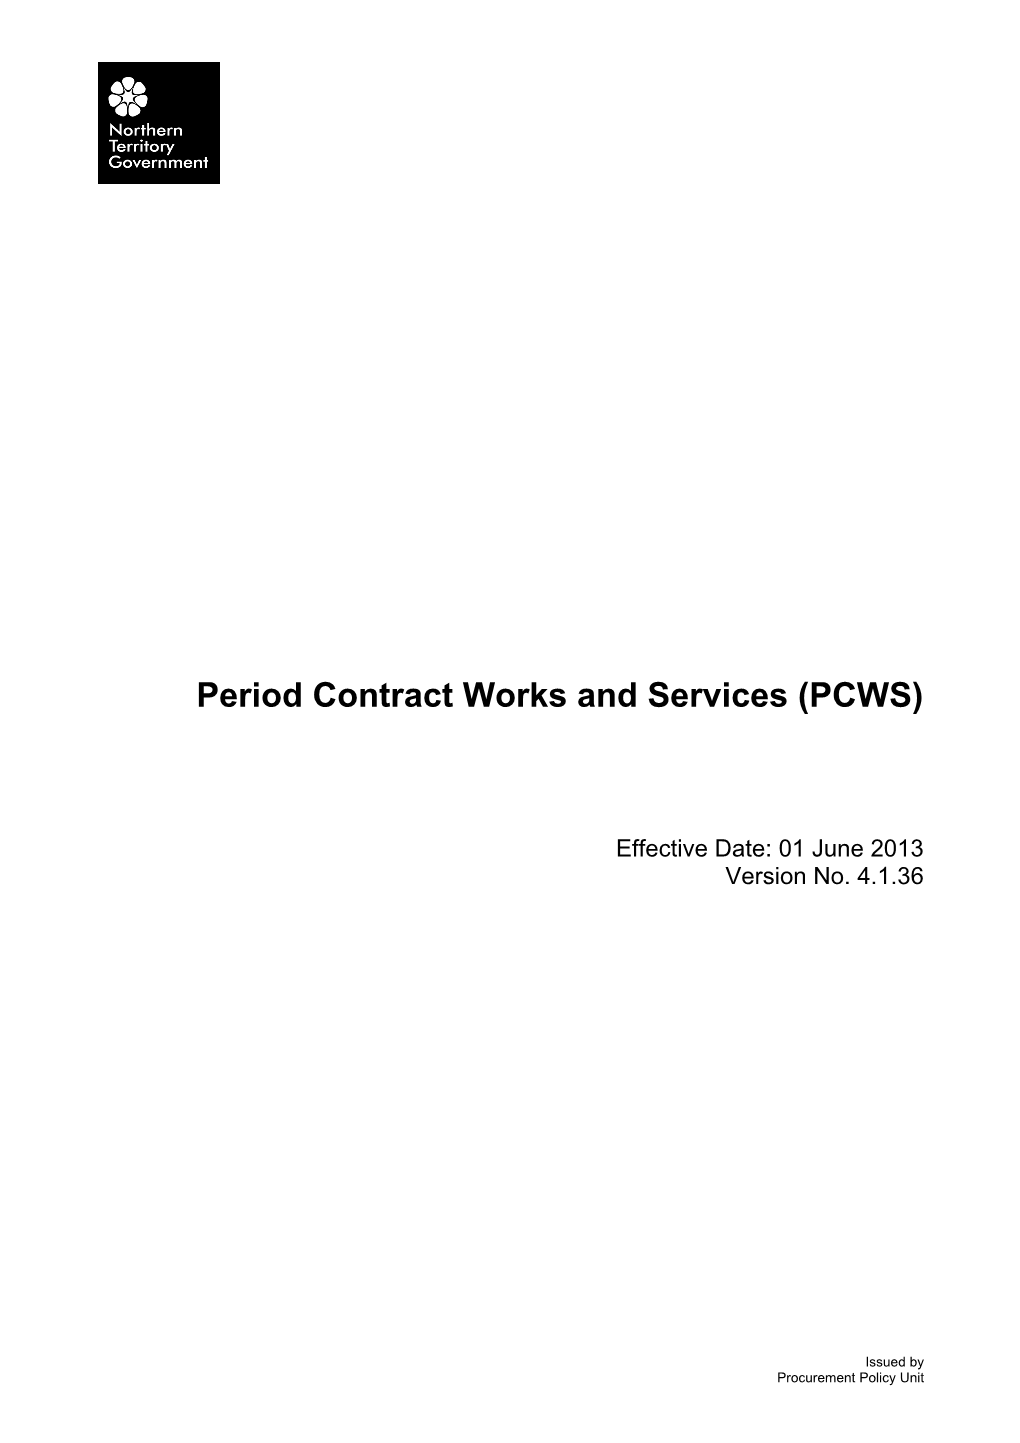 Conditions: Tendering and Contract PCWS - V 4.1.36 (01 June 2013)